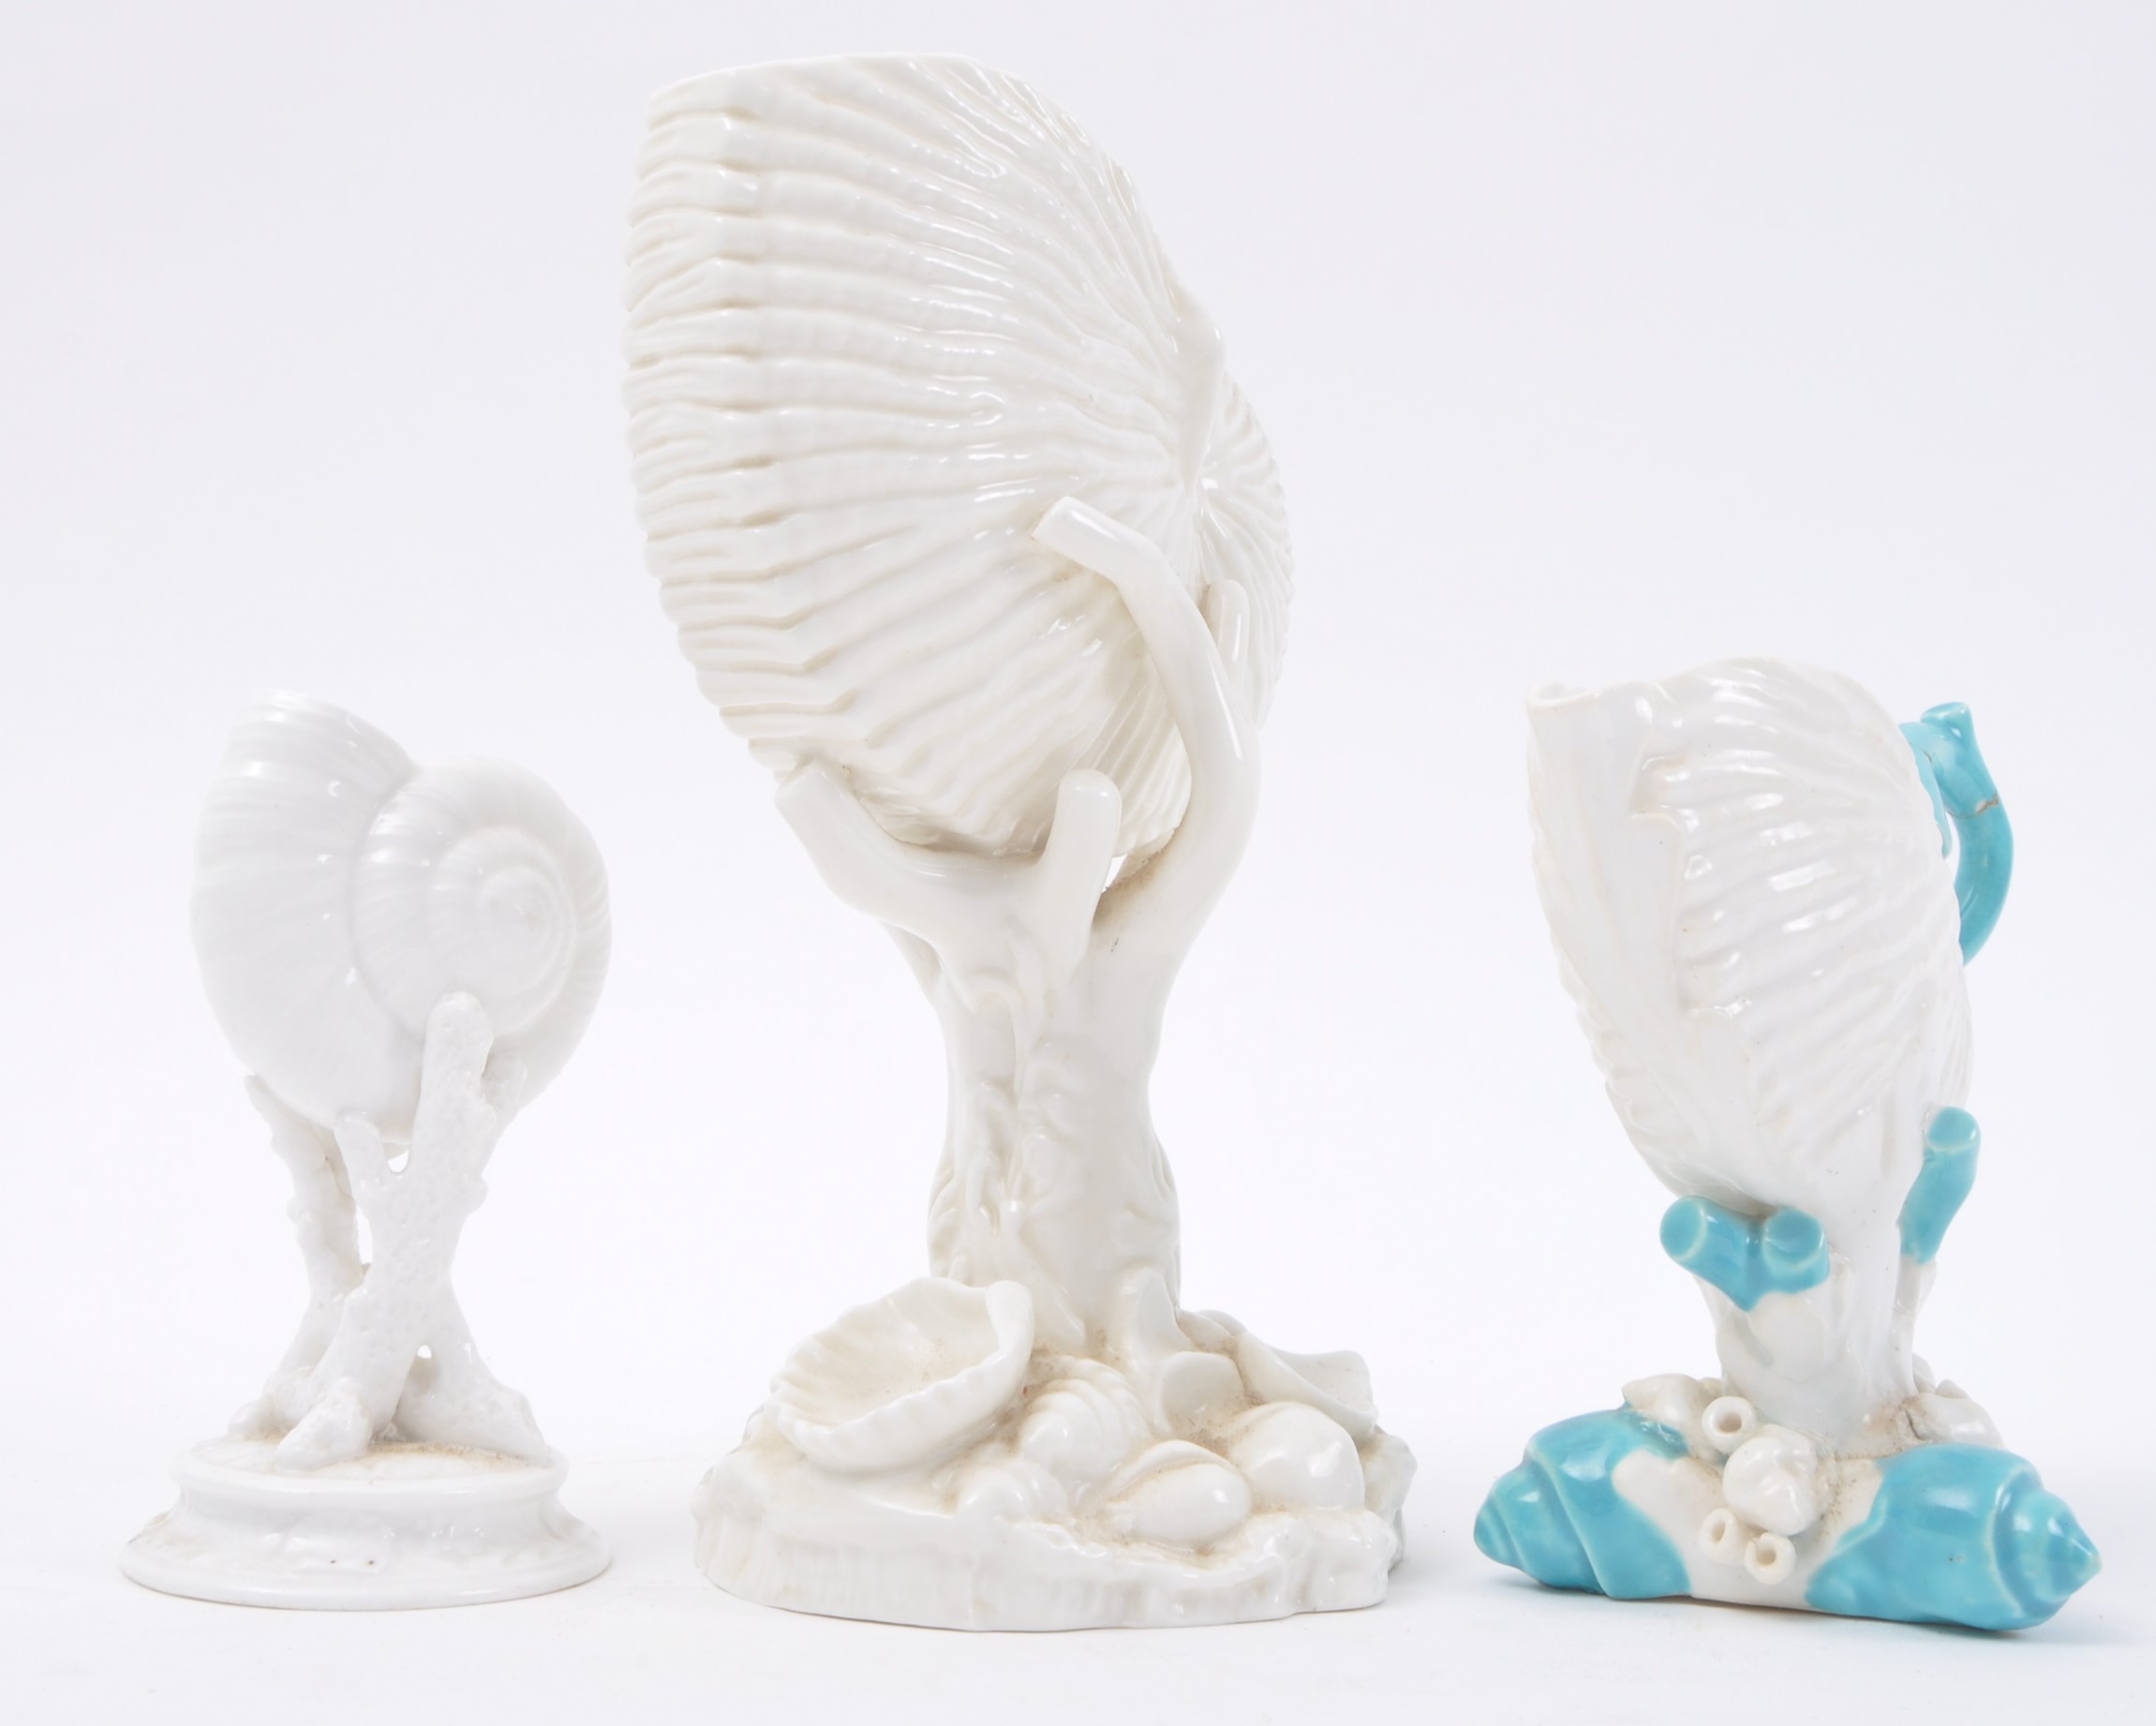 THREE LATE 19TH CENTURY WHITE PORCELAIN SHELL DISPLAYS - Image 3 of 8